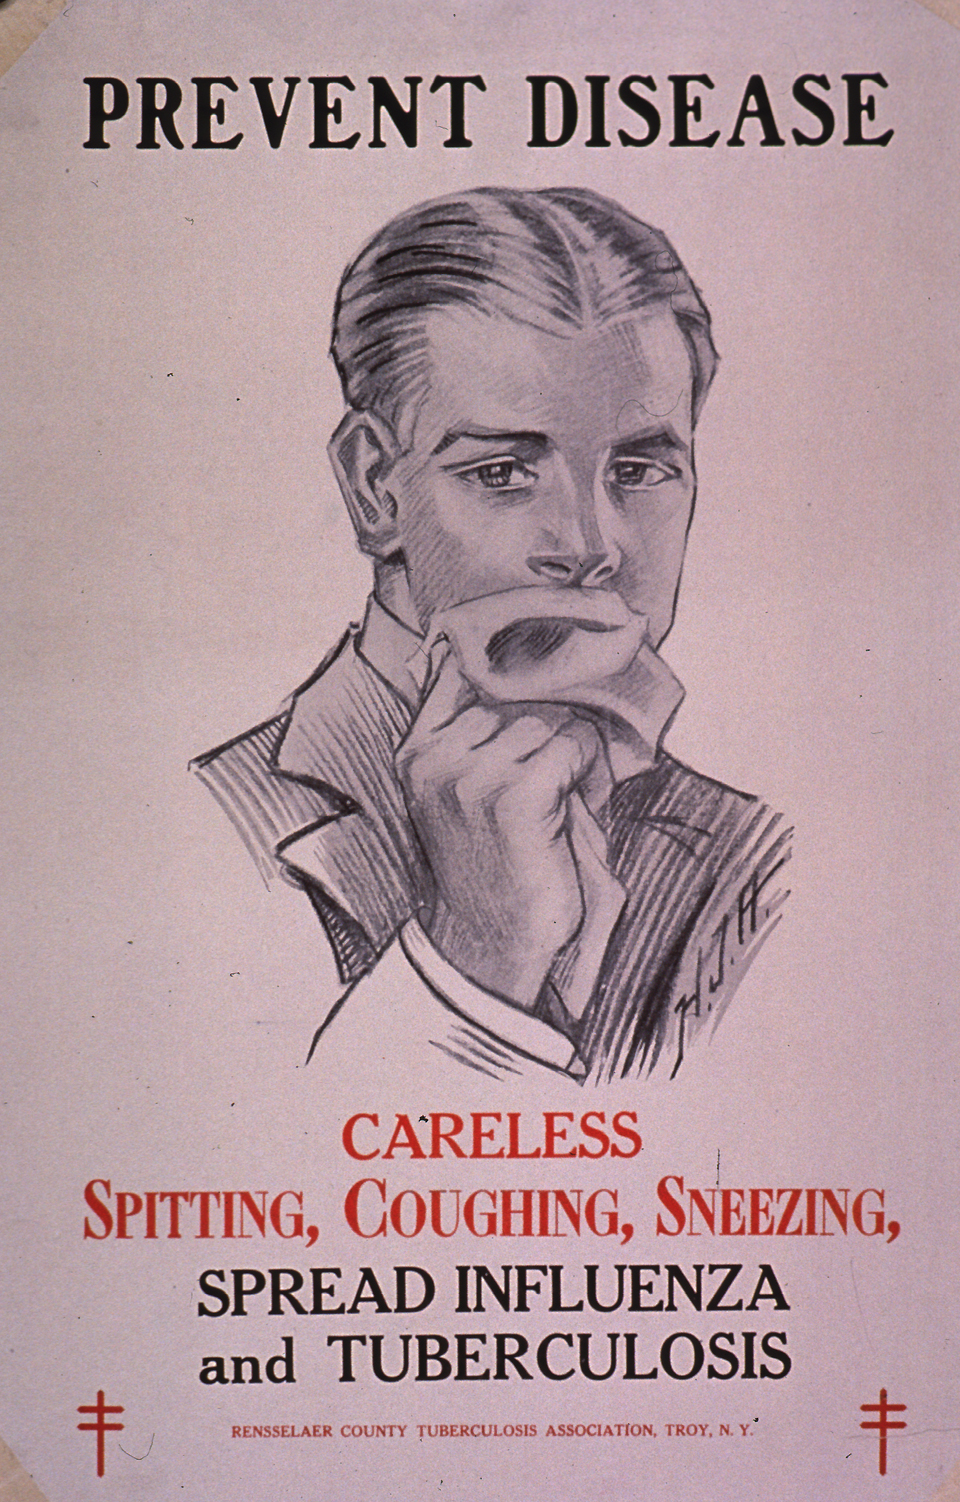 Predominantly white poster with black and red lettering. Title at top of poster. Visual image is an illustration of a man holding a handkerchief over his mouth. Caption and publisher information below illustration.